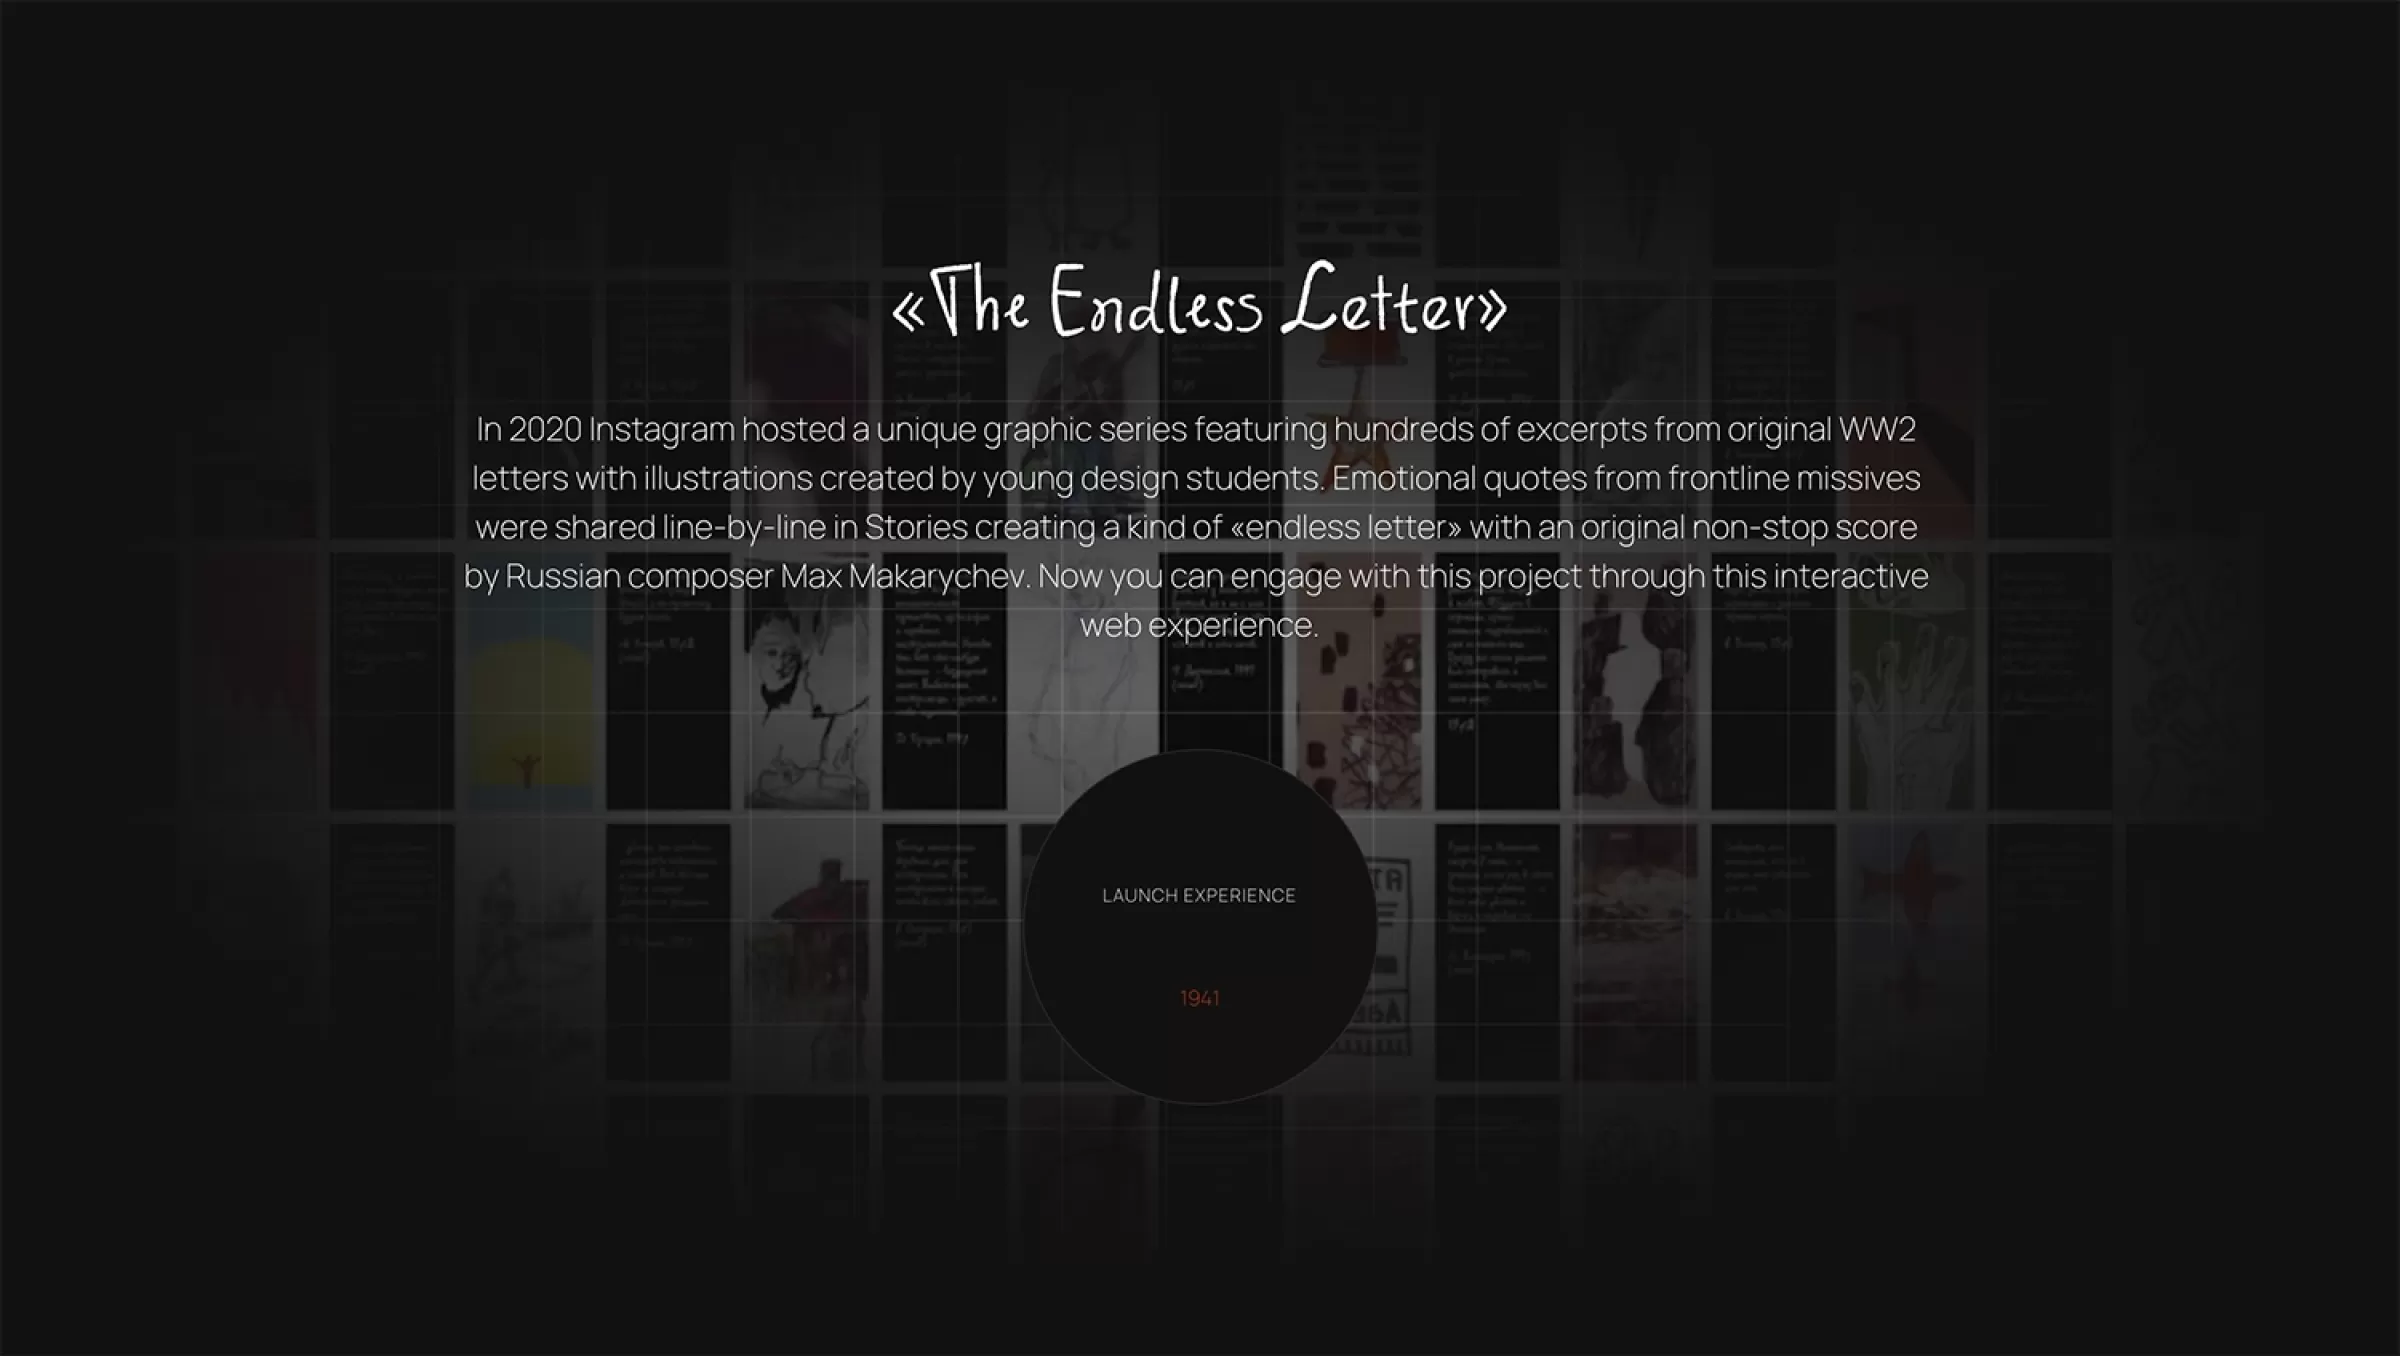 The Endless Letter